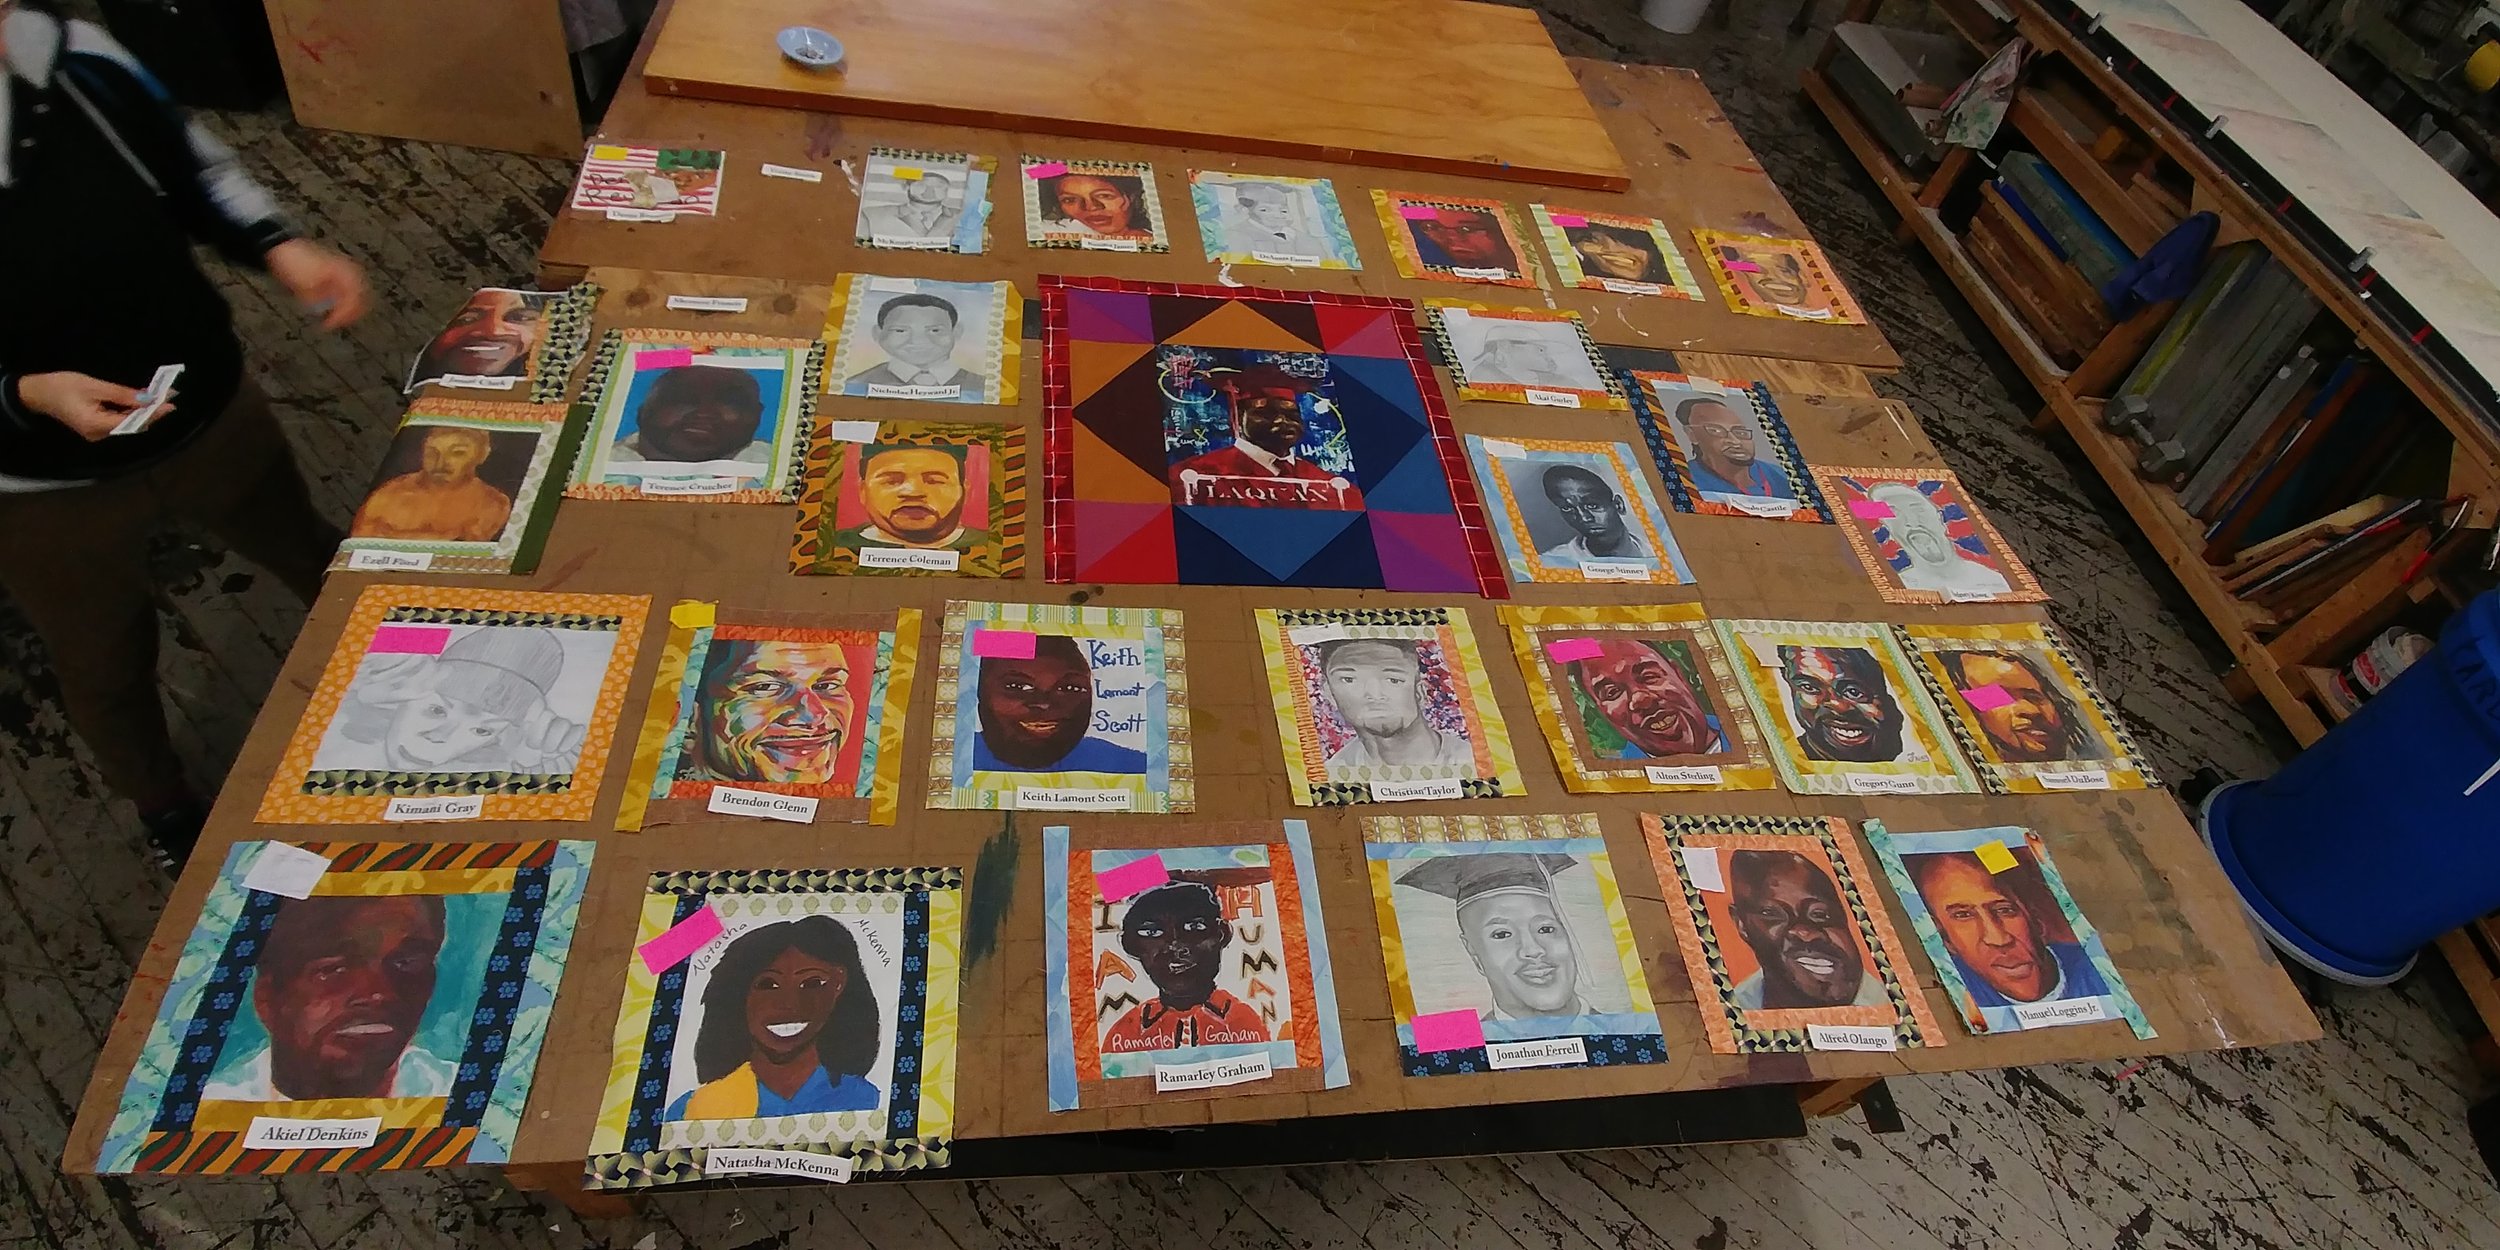  Deciding who we would include in the two quilts of memorialization was daunting, for there are so many who have died through state sanctioned violence. After much work, collaboration and prayer, we chose an intergenerational group again.  